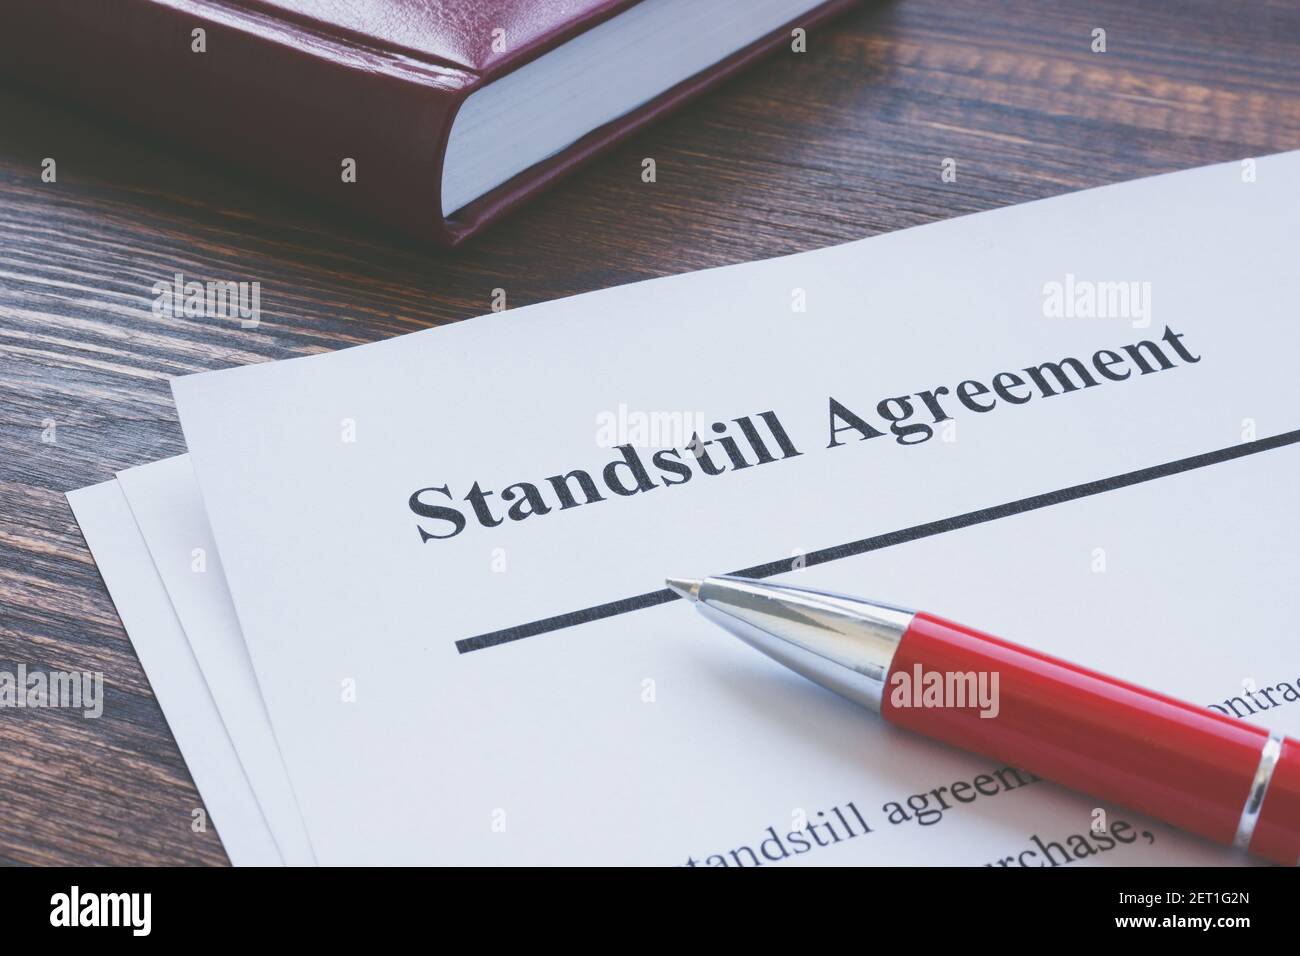 Legal term Standstill Agreement information and red pen. Stock Photo